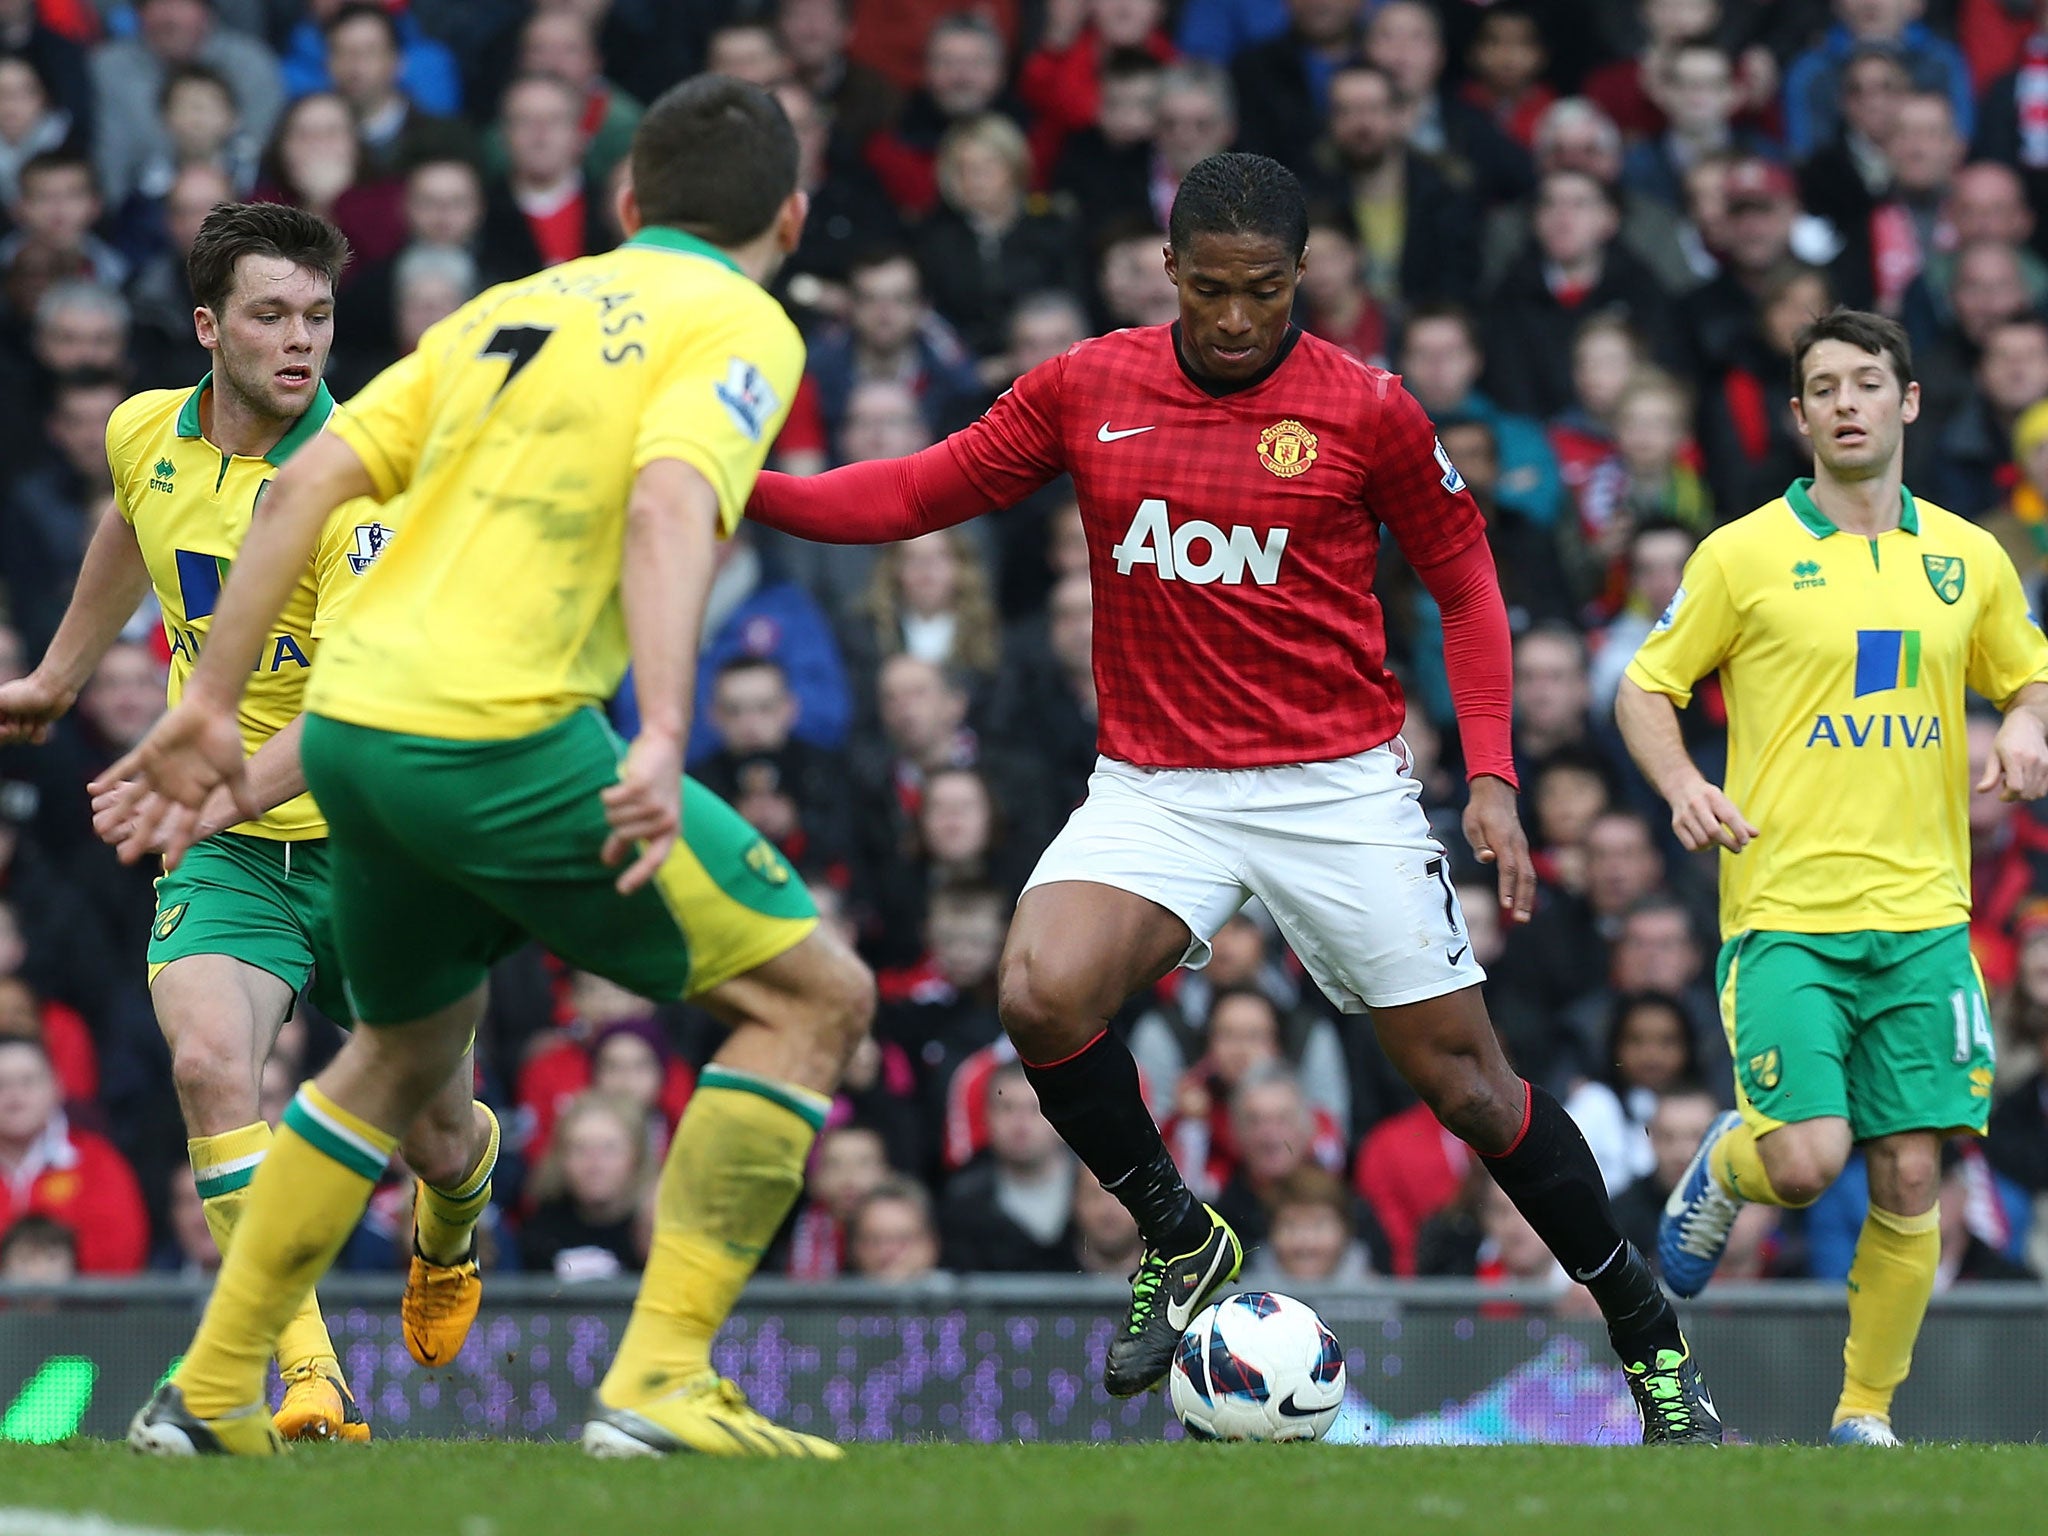 Antonio Valencia of Manchester United in action with Robert Snodgrass of Norwich City